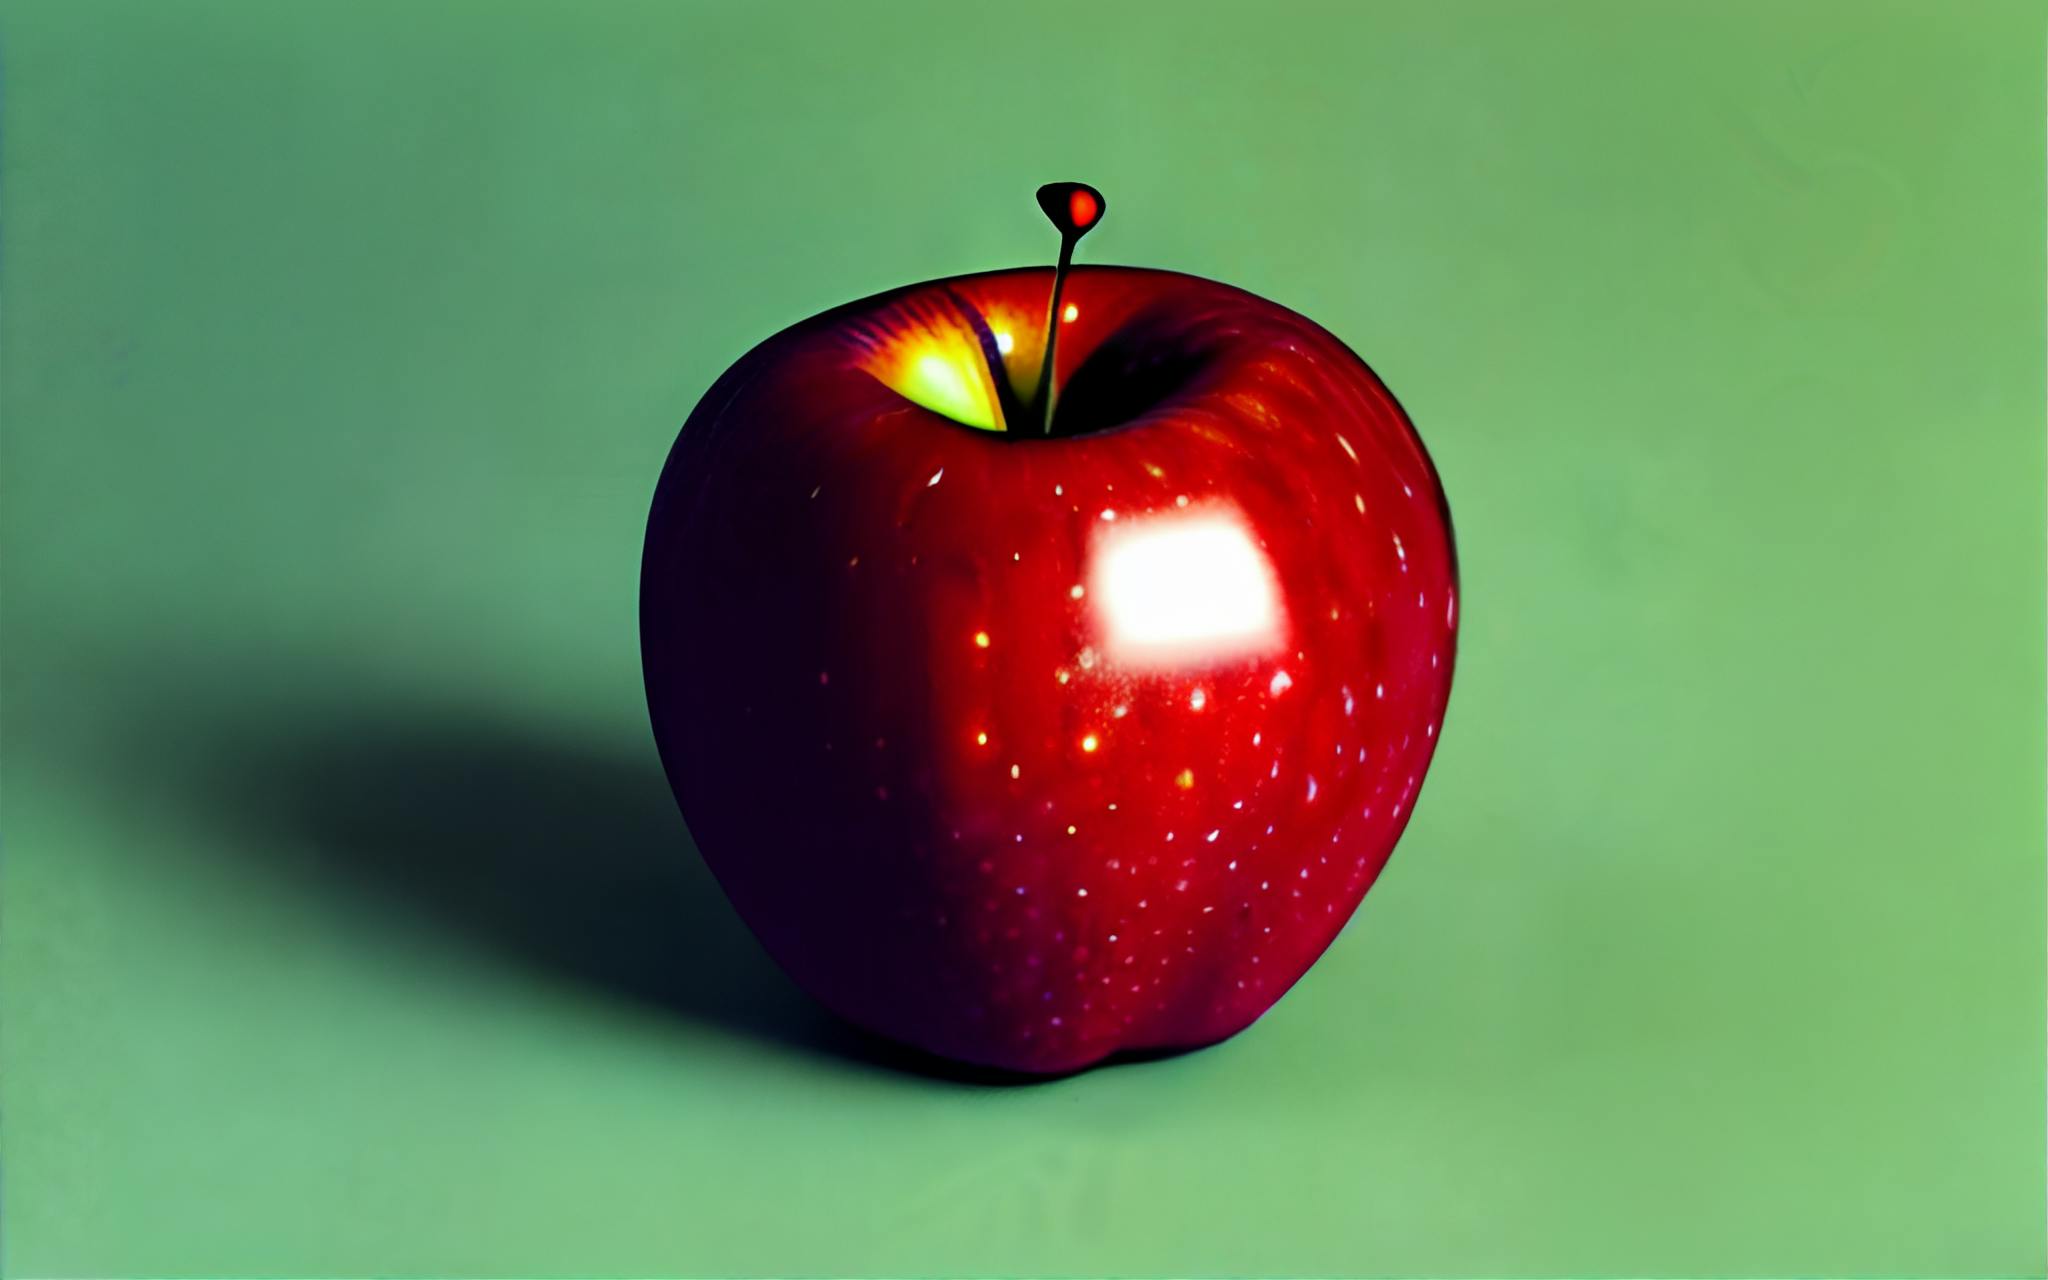 red apple on a green background, photorealistic